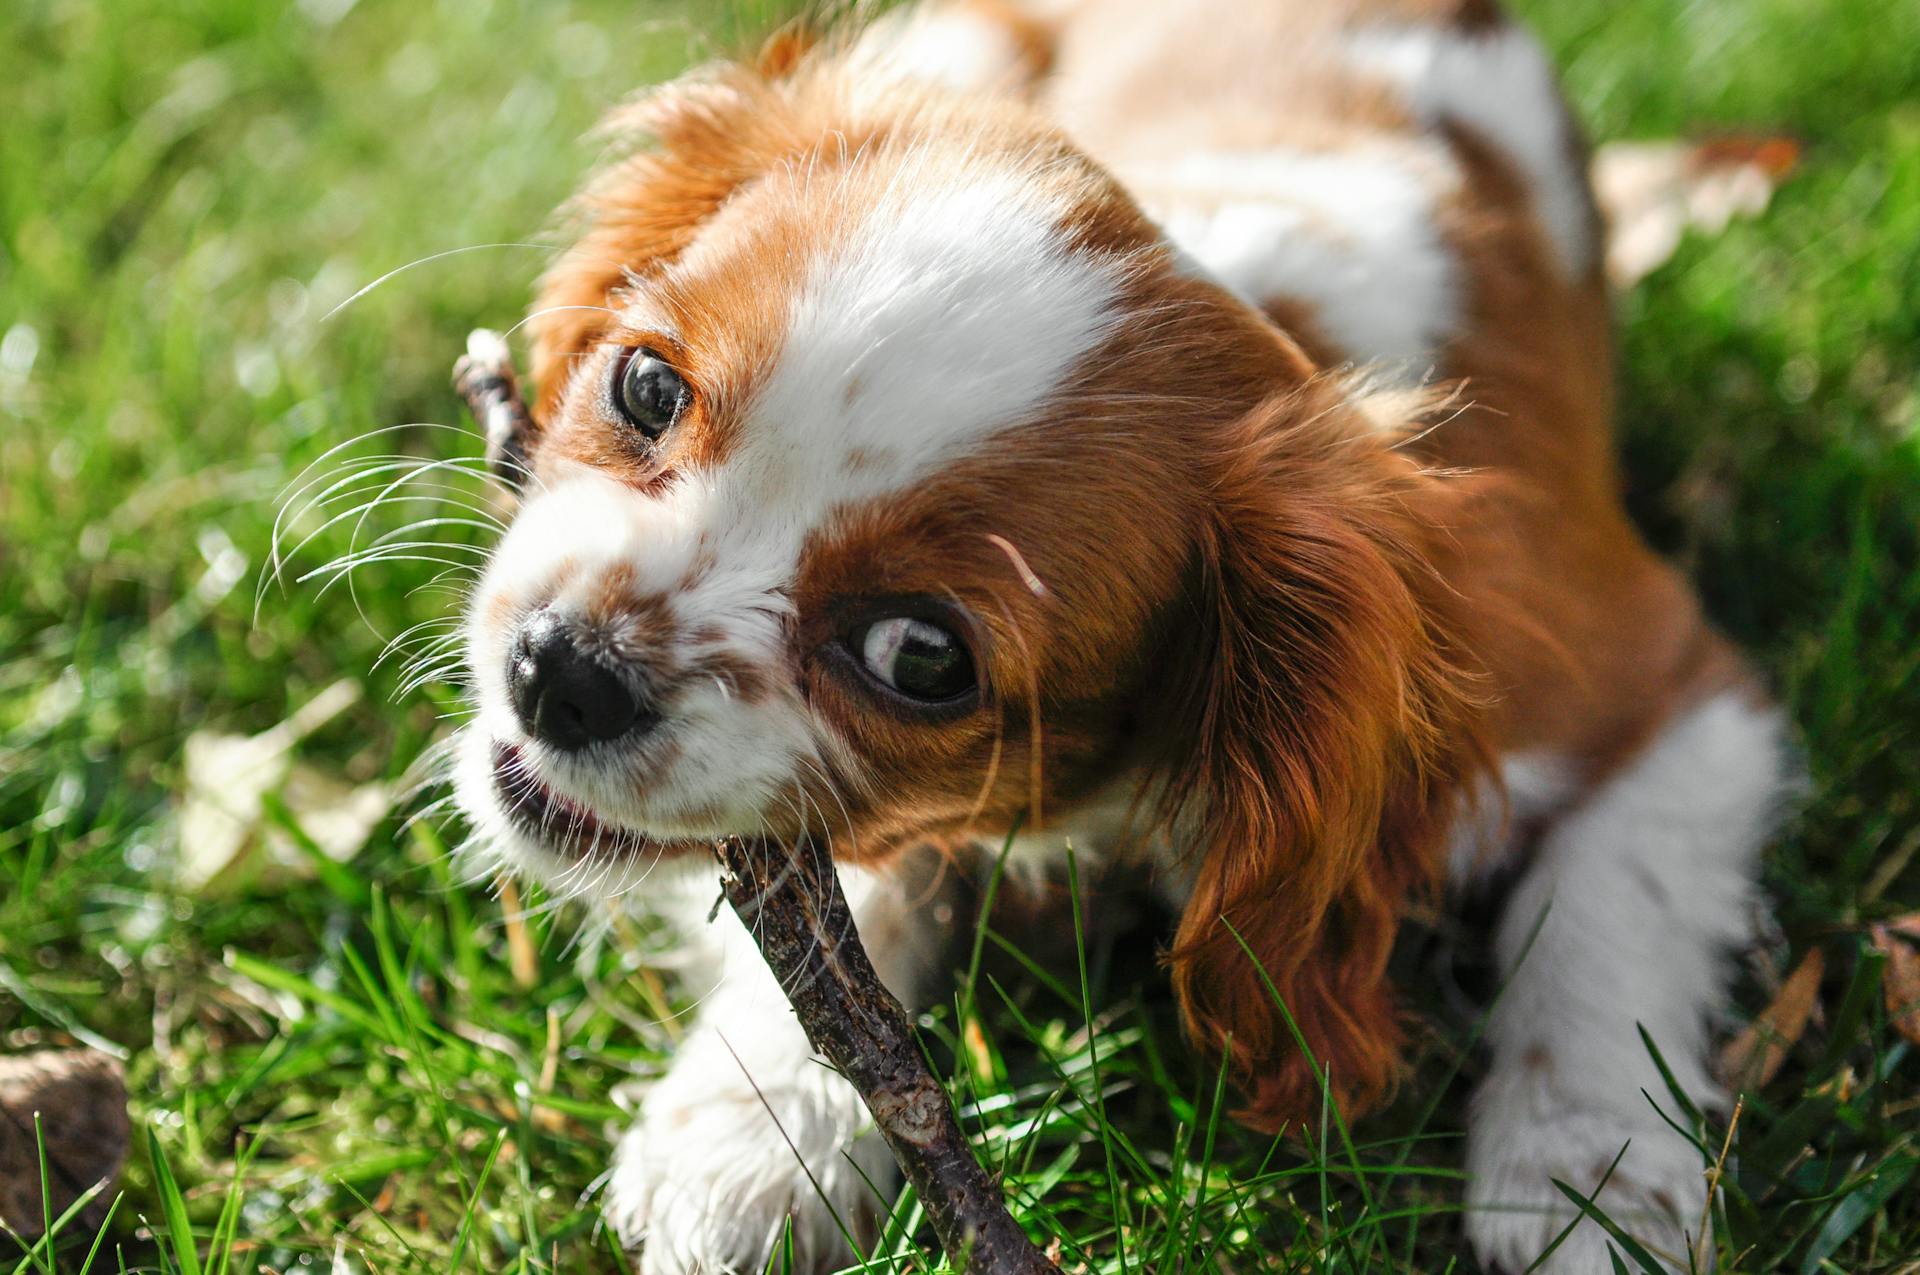 A puppy gnawing on a tree branch